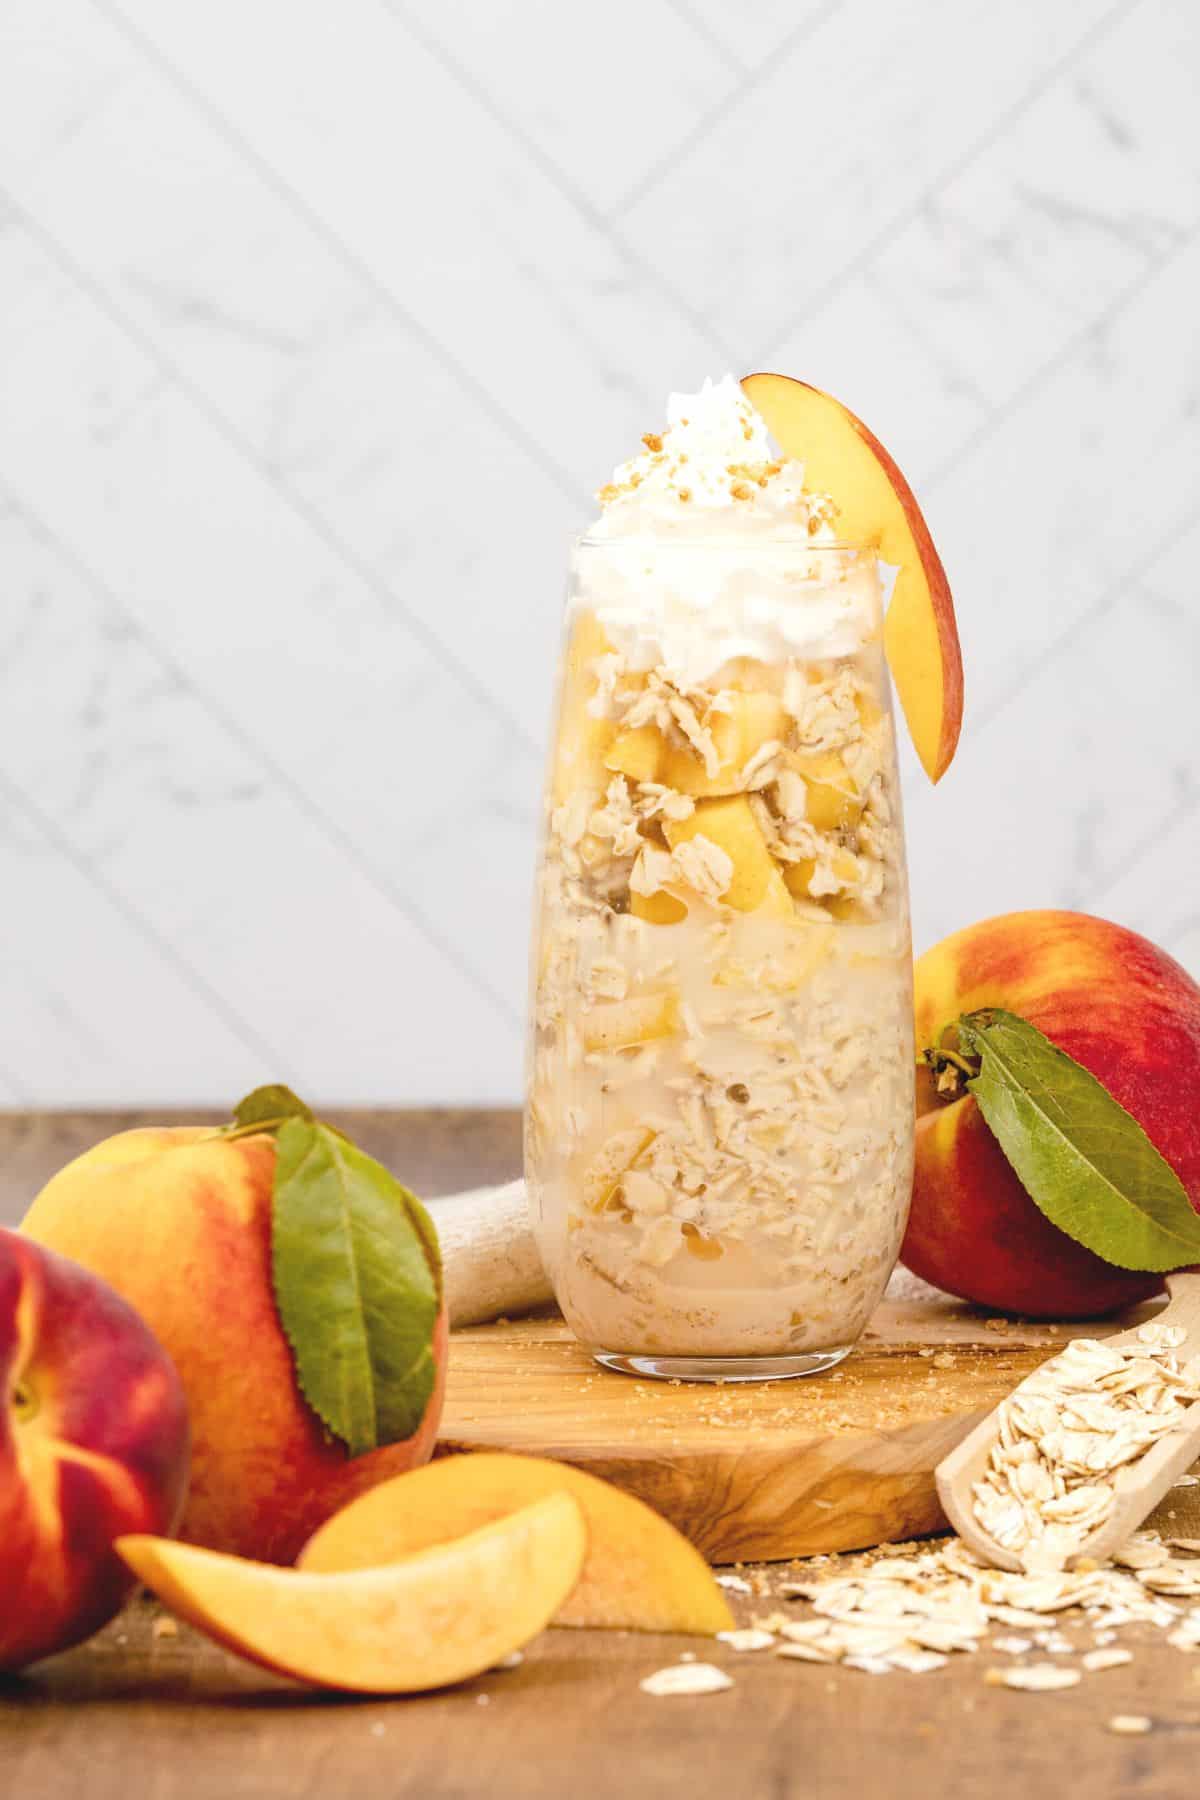 peach overnight oats in a glass flute cup with whip cream on top. peaches and slices of peaches surround the glass with some raw oats.